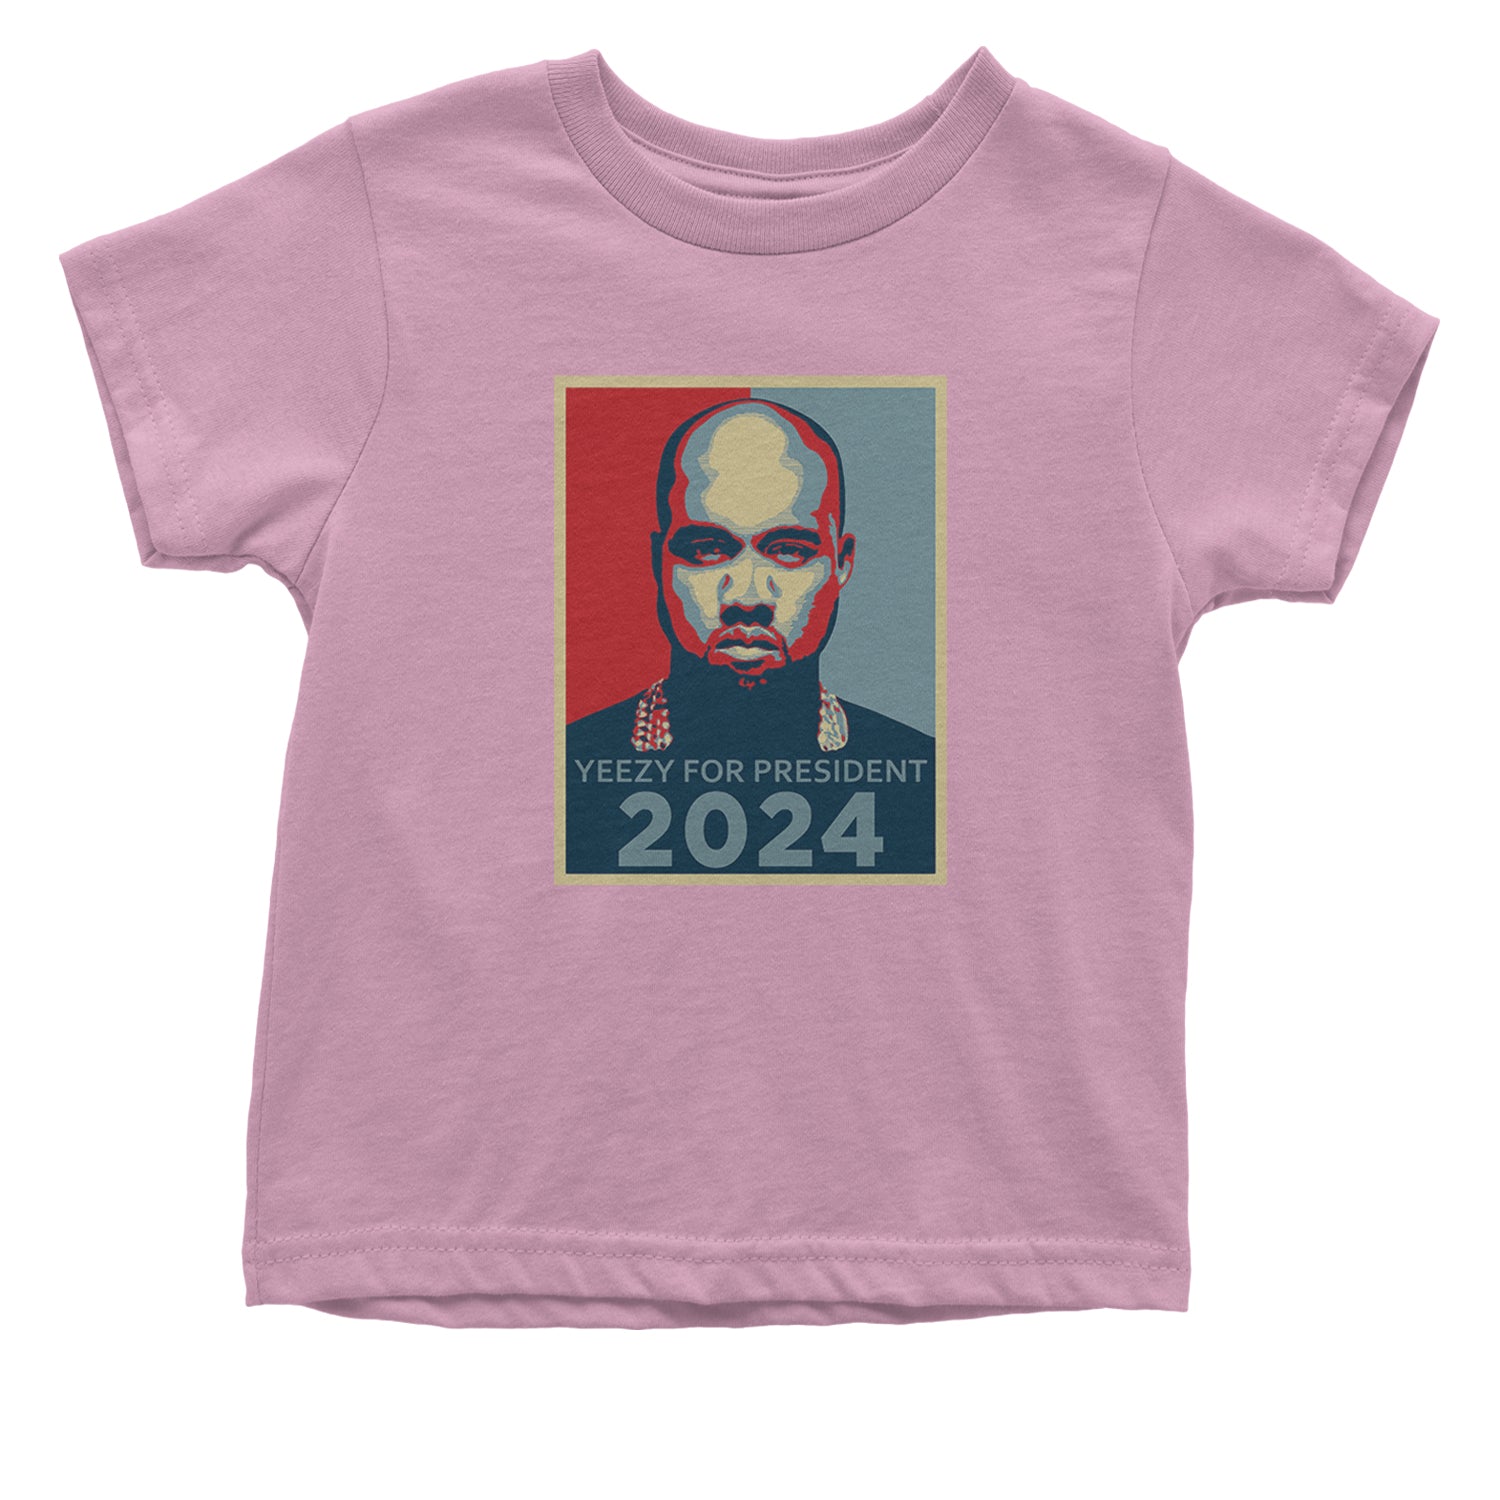 Yeezus For President Vote for Ye Infant One-Piece Romper Bodysuit and Toddler T-shirt Light Pink